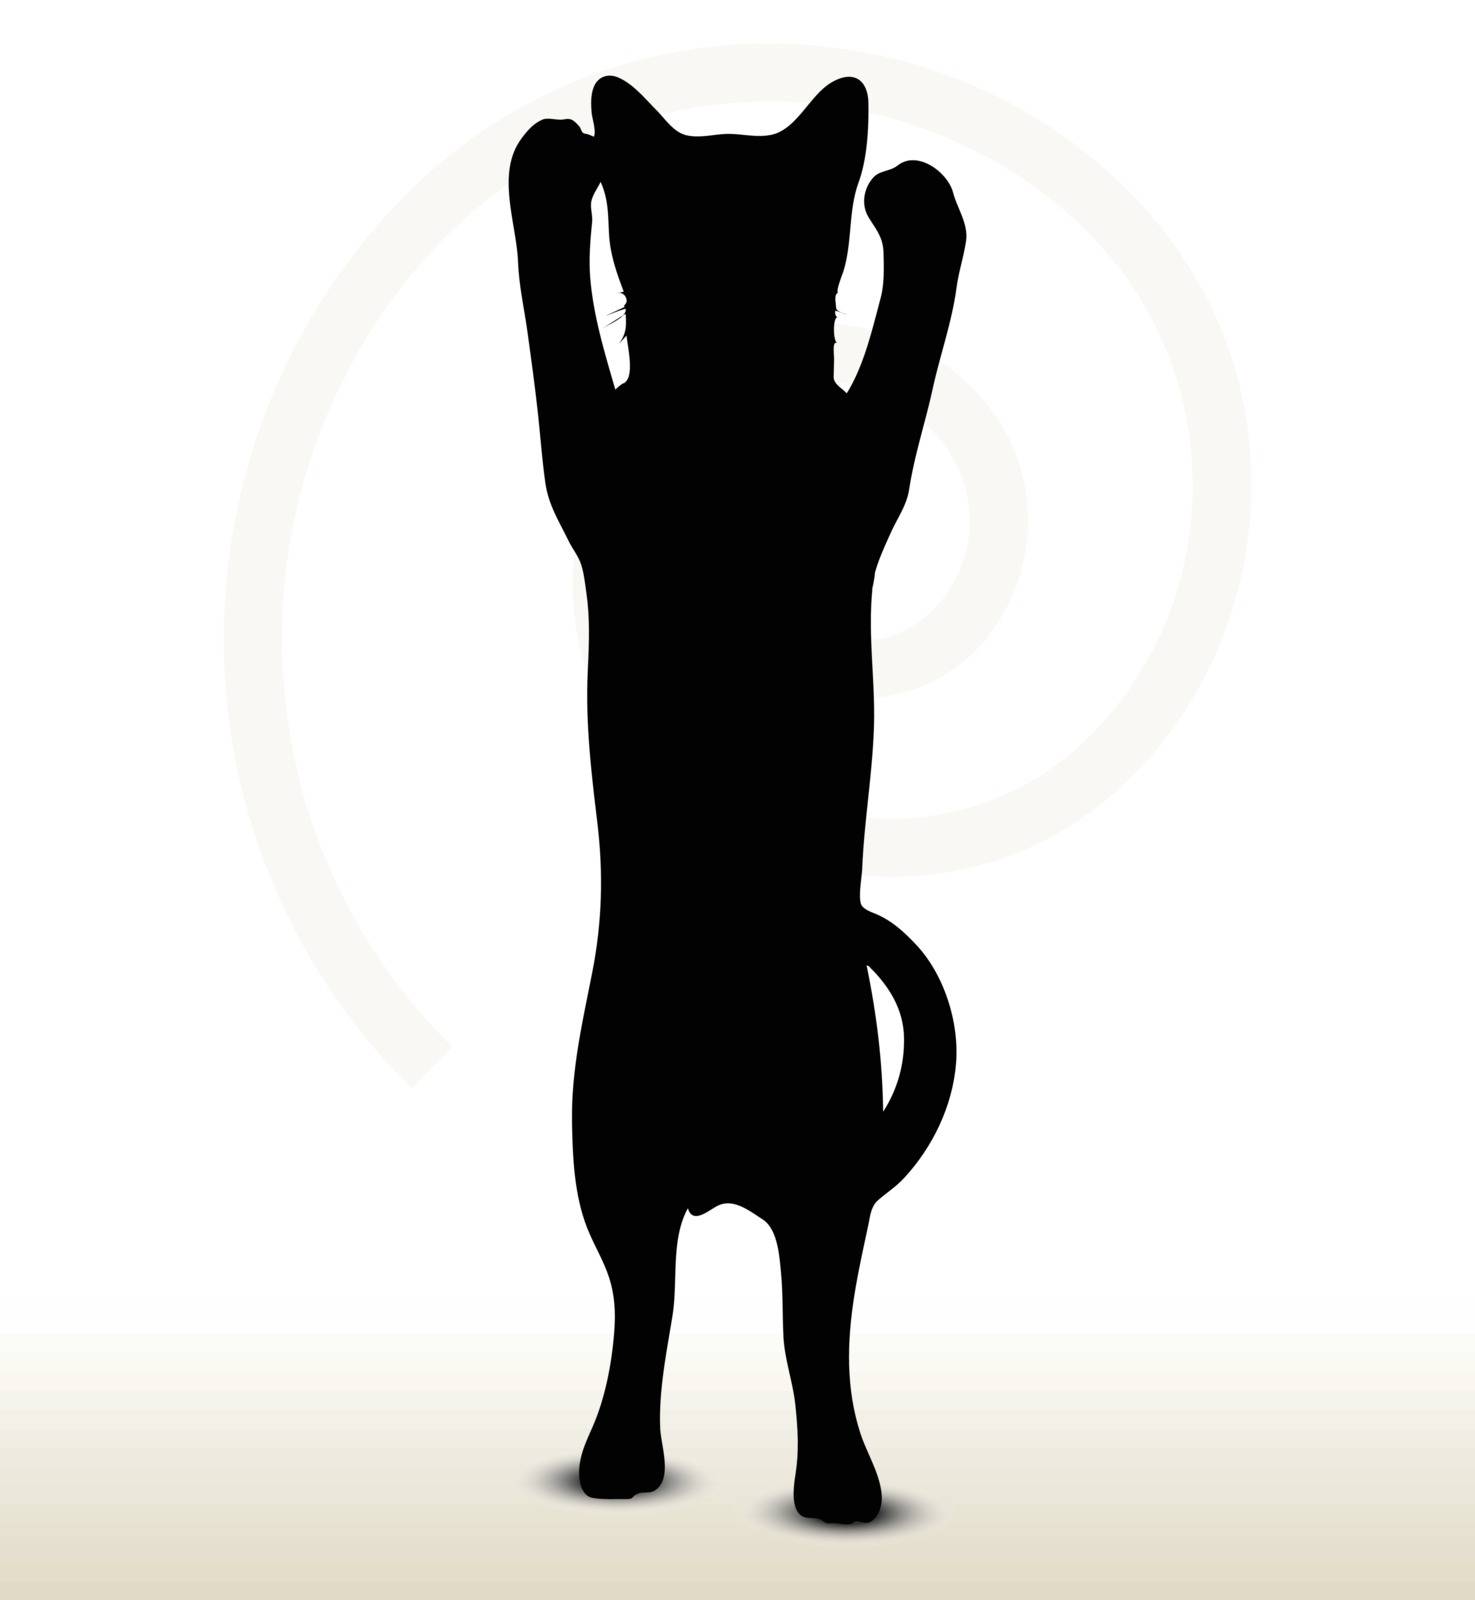 illustration of cat silhouette isolated on white background - in boxing pose